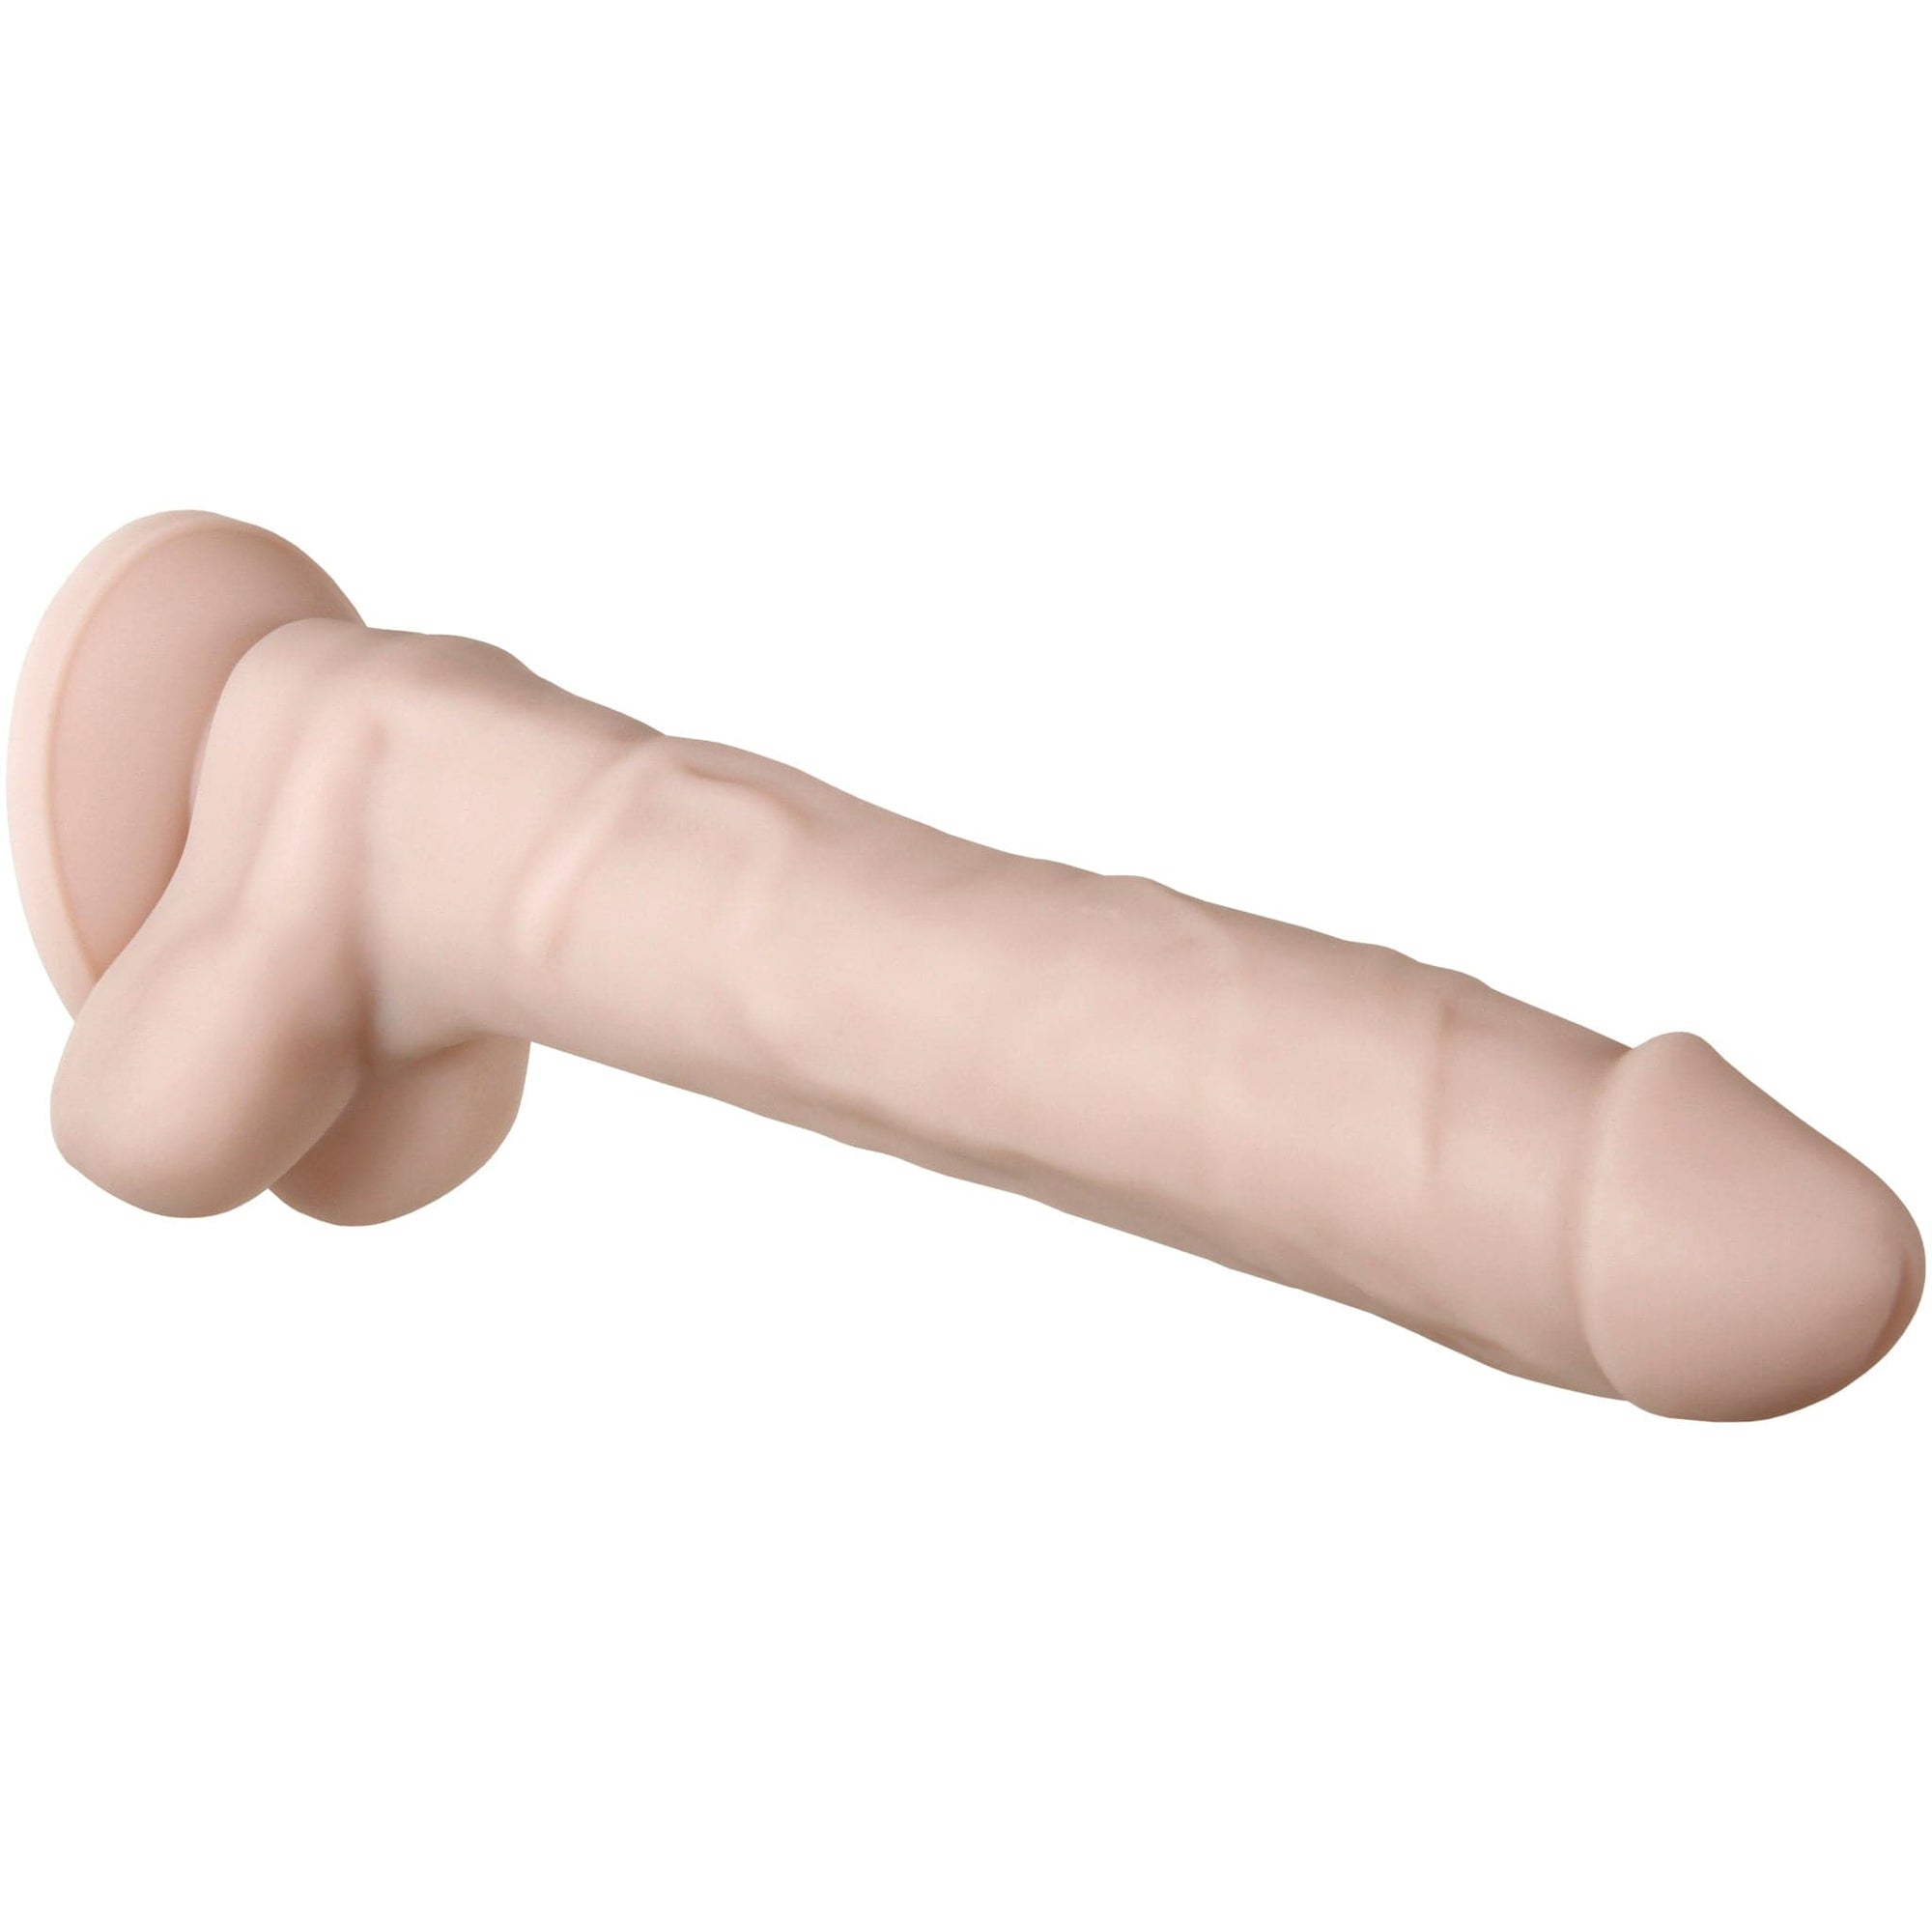 Evolved - Real Supple Silicone Posable Realistic Dildo 10" (Beige) -  Realistic Dildo with suction cup (Non Vibration)  Durio.sg